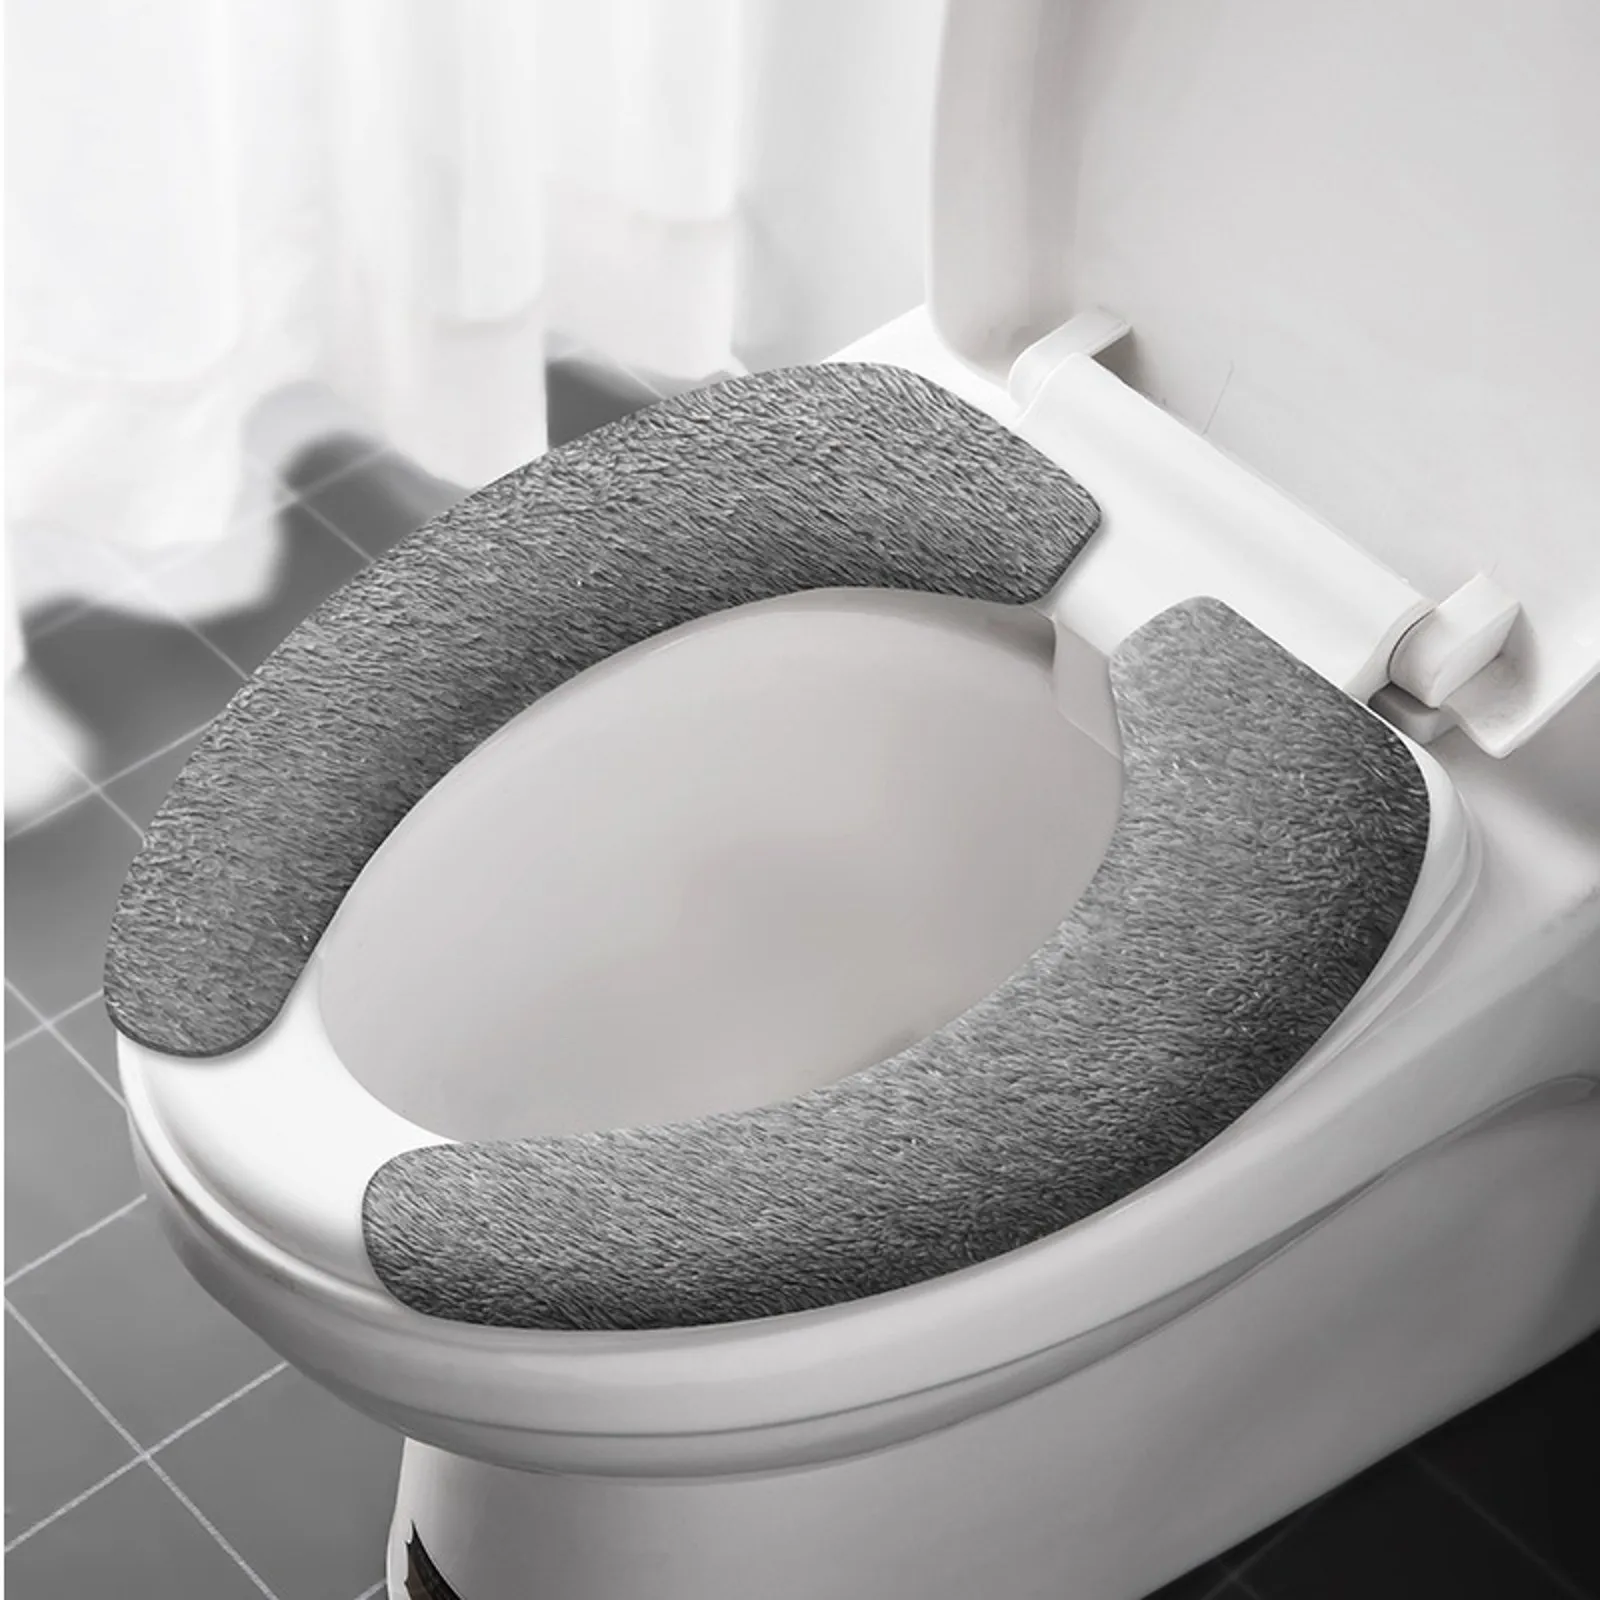 Toilet Seat Cover PadsThicker Soft Bathroom Warmer Handle Toilet Seat Cover Pad Stretchable Washable Bath Rugs for Bathroom Thin